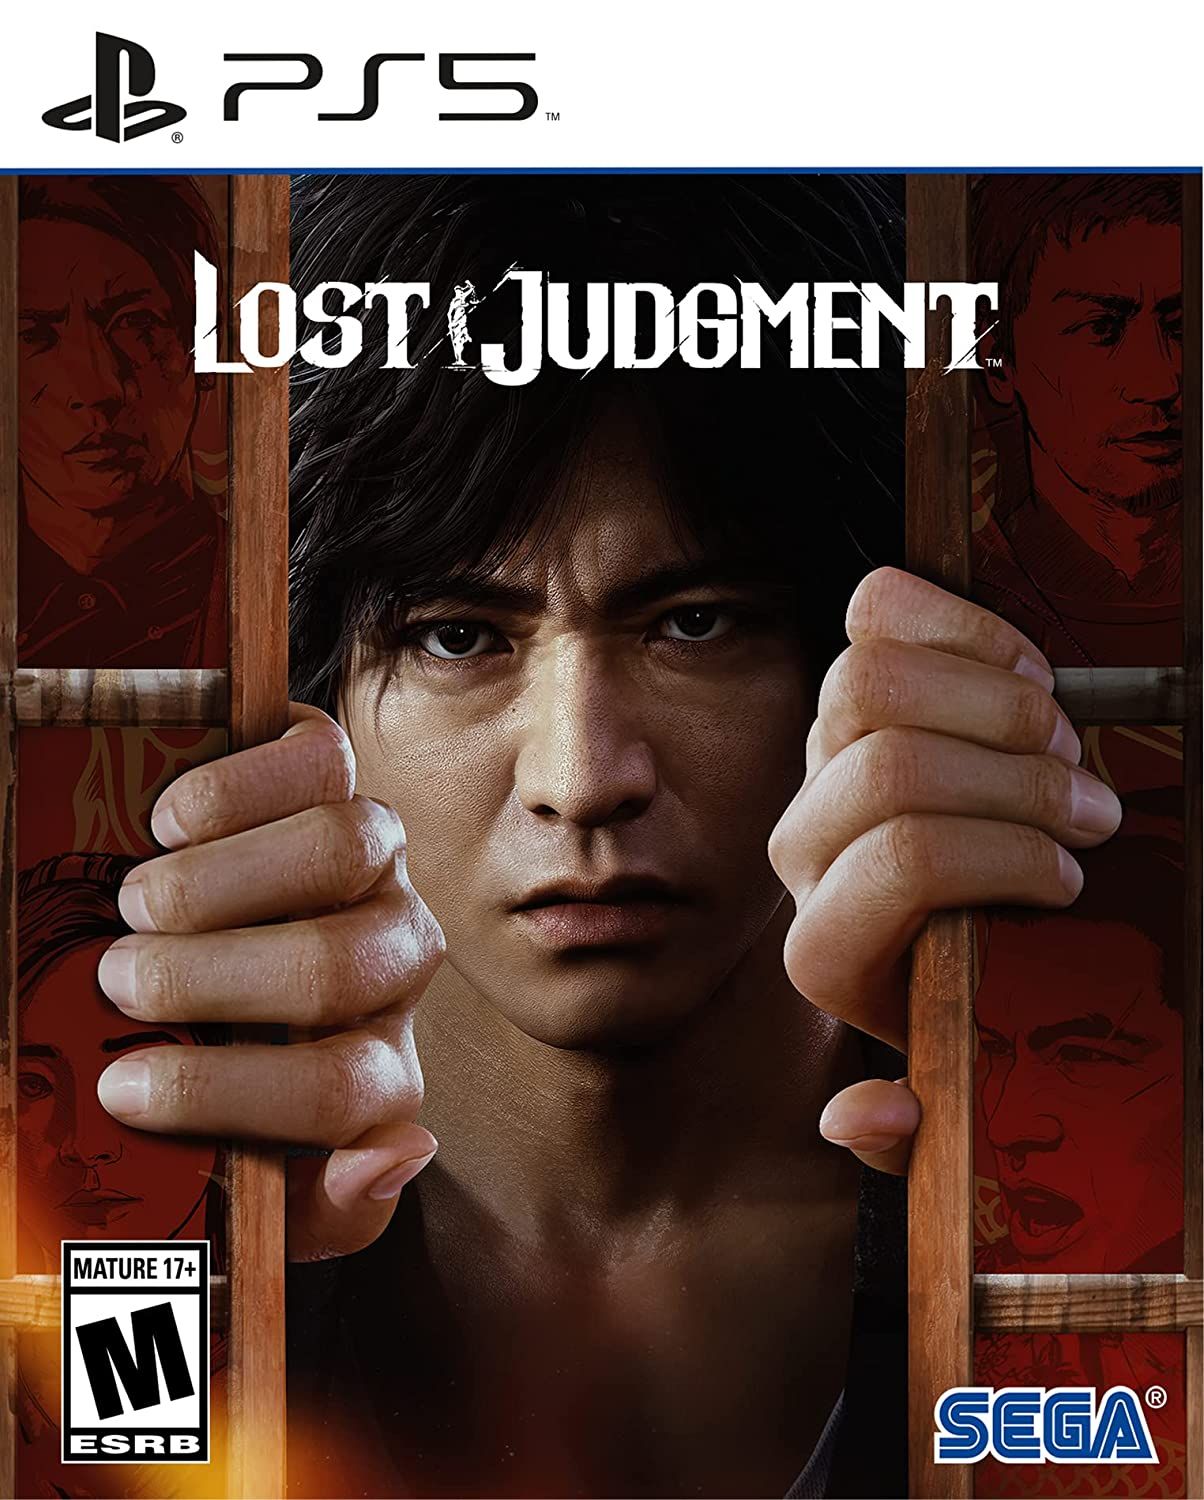 Lost Judgement game cover with man pulling aside the doors to a prison cell